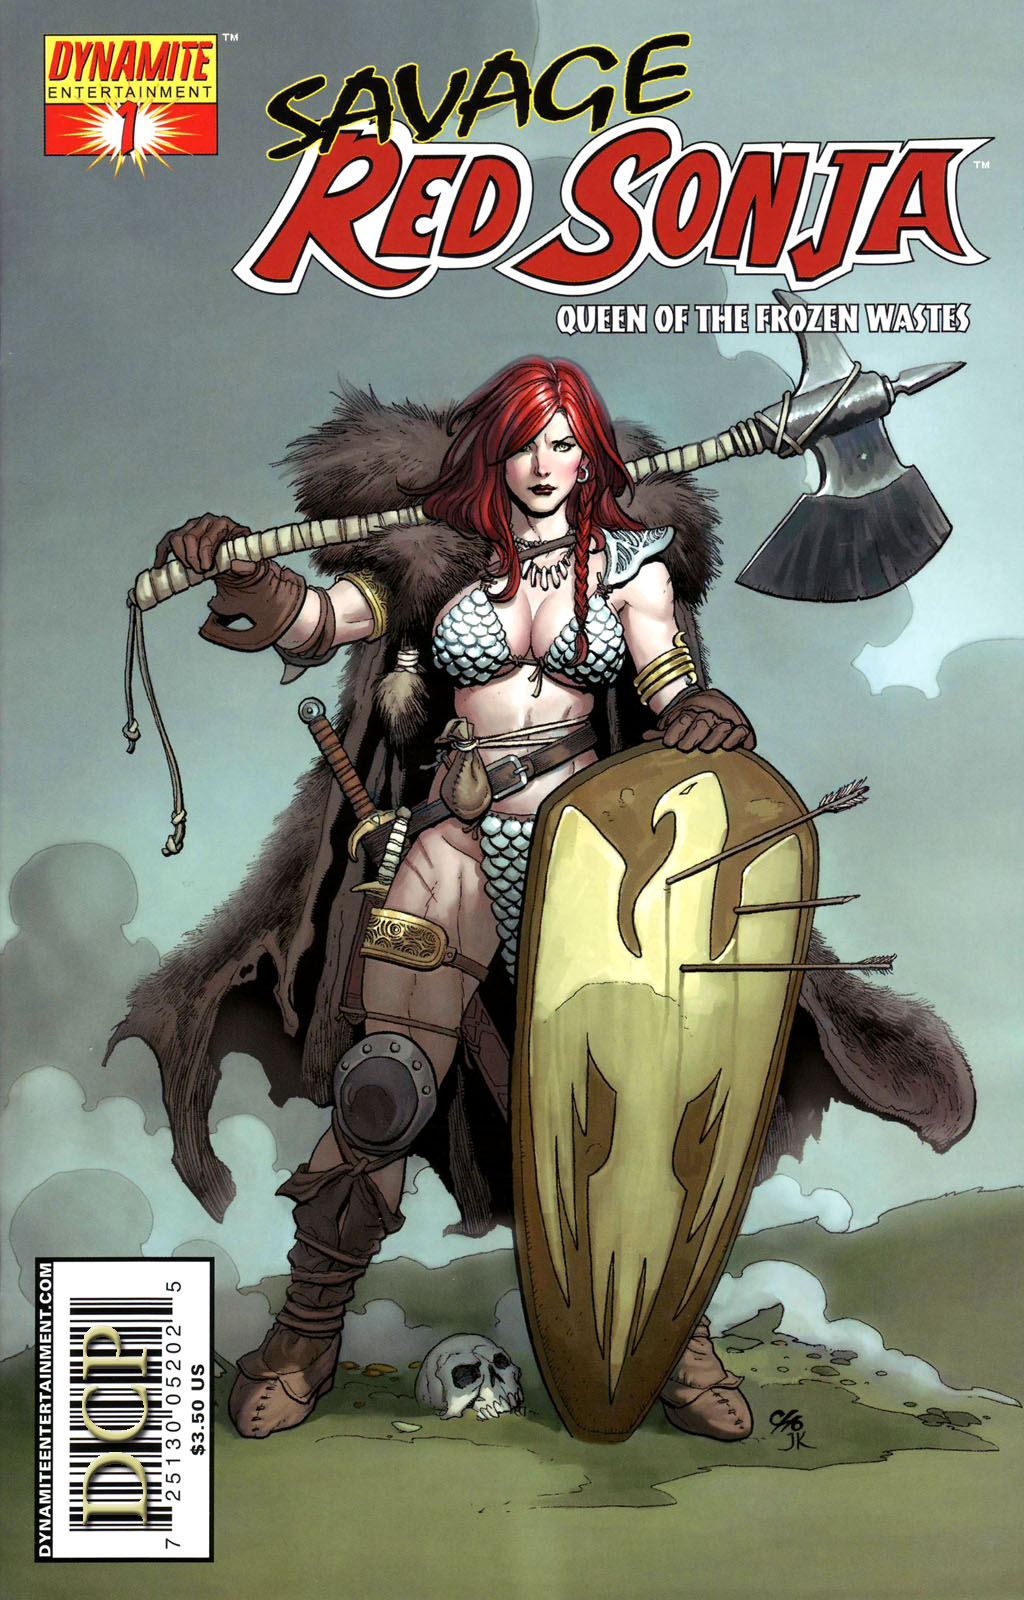 Dynamite Entertainment - Savage Red Sonja Queen of the Frozen Wastes 1-4